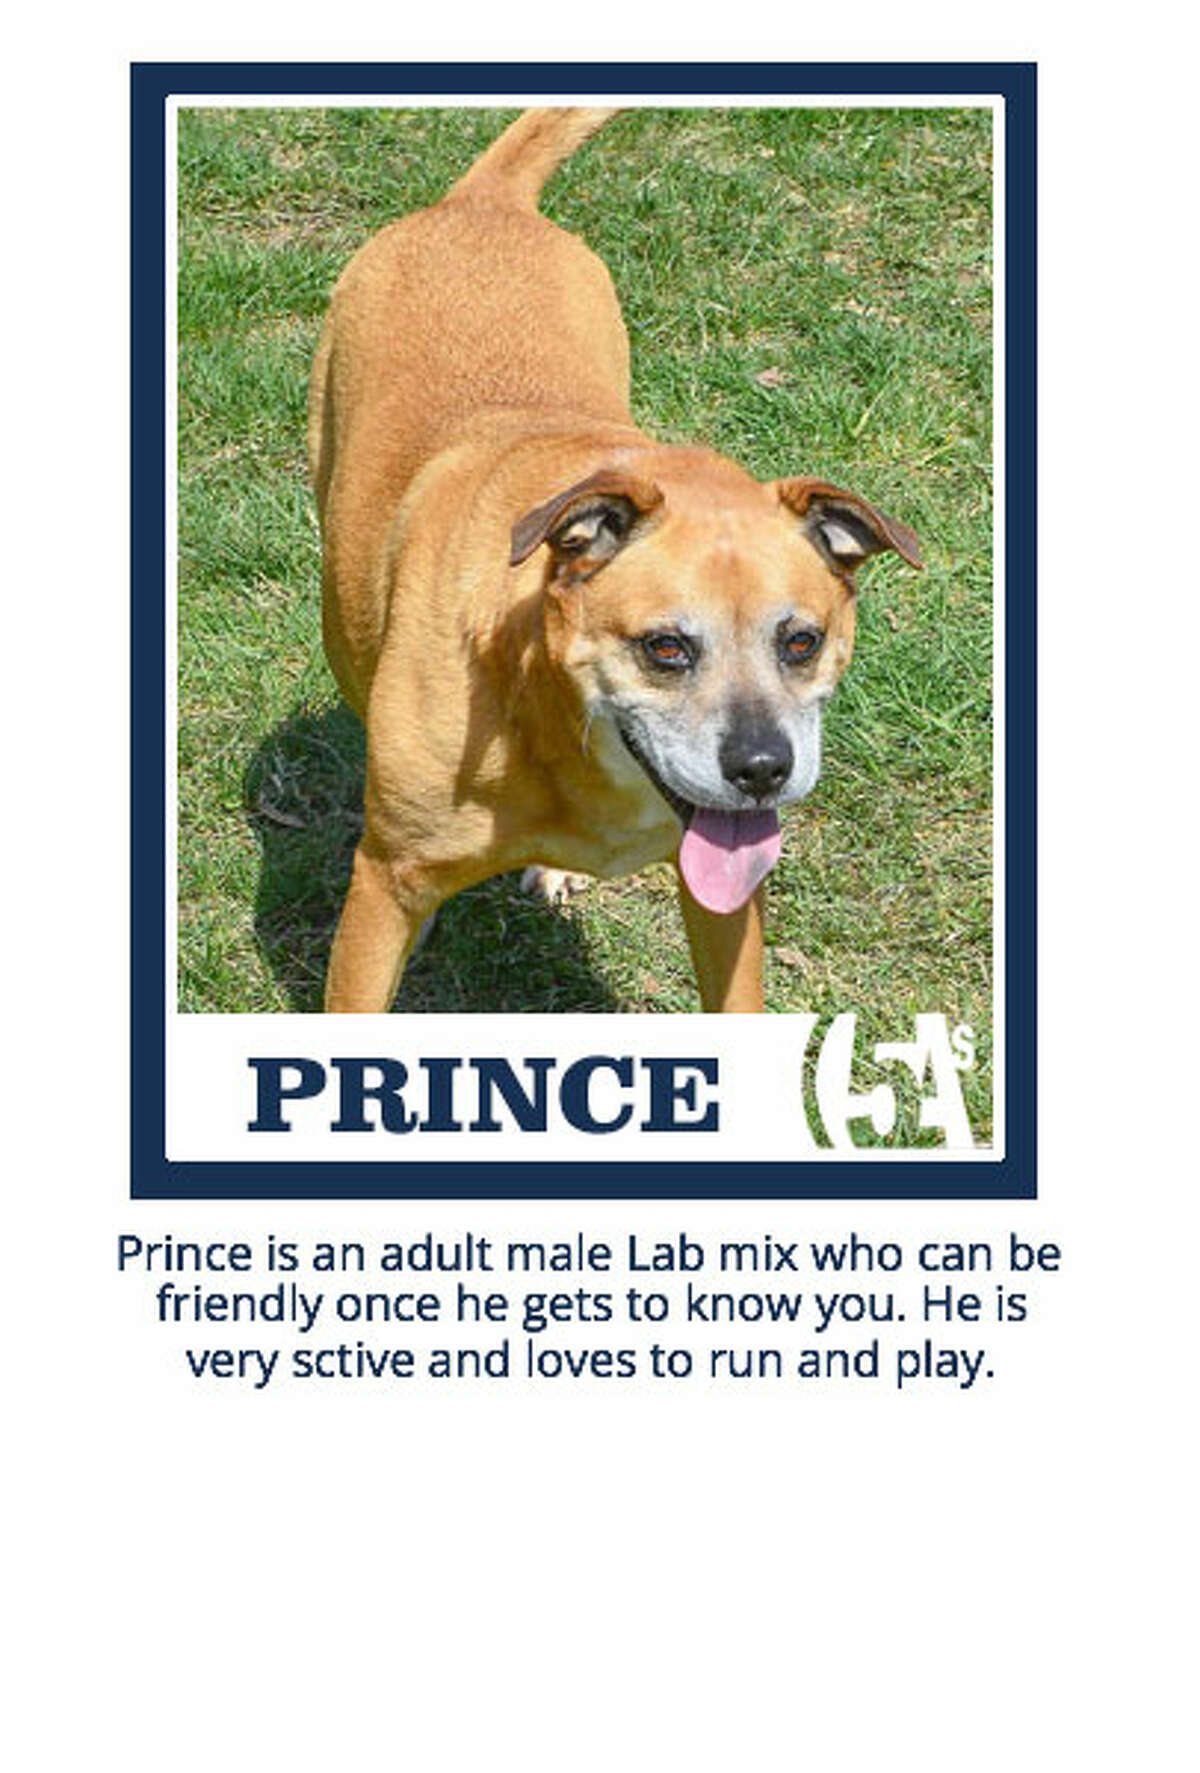 Prince is an adult male lab mix who can be friendly once he gets to know you. He is very active and loves to run and play.